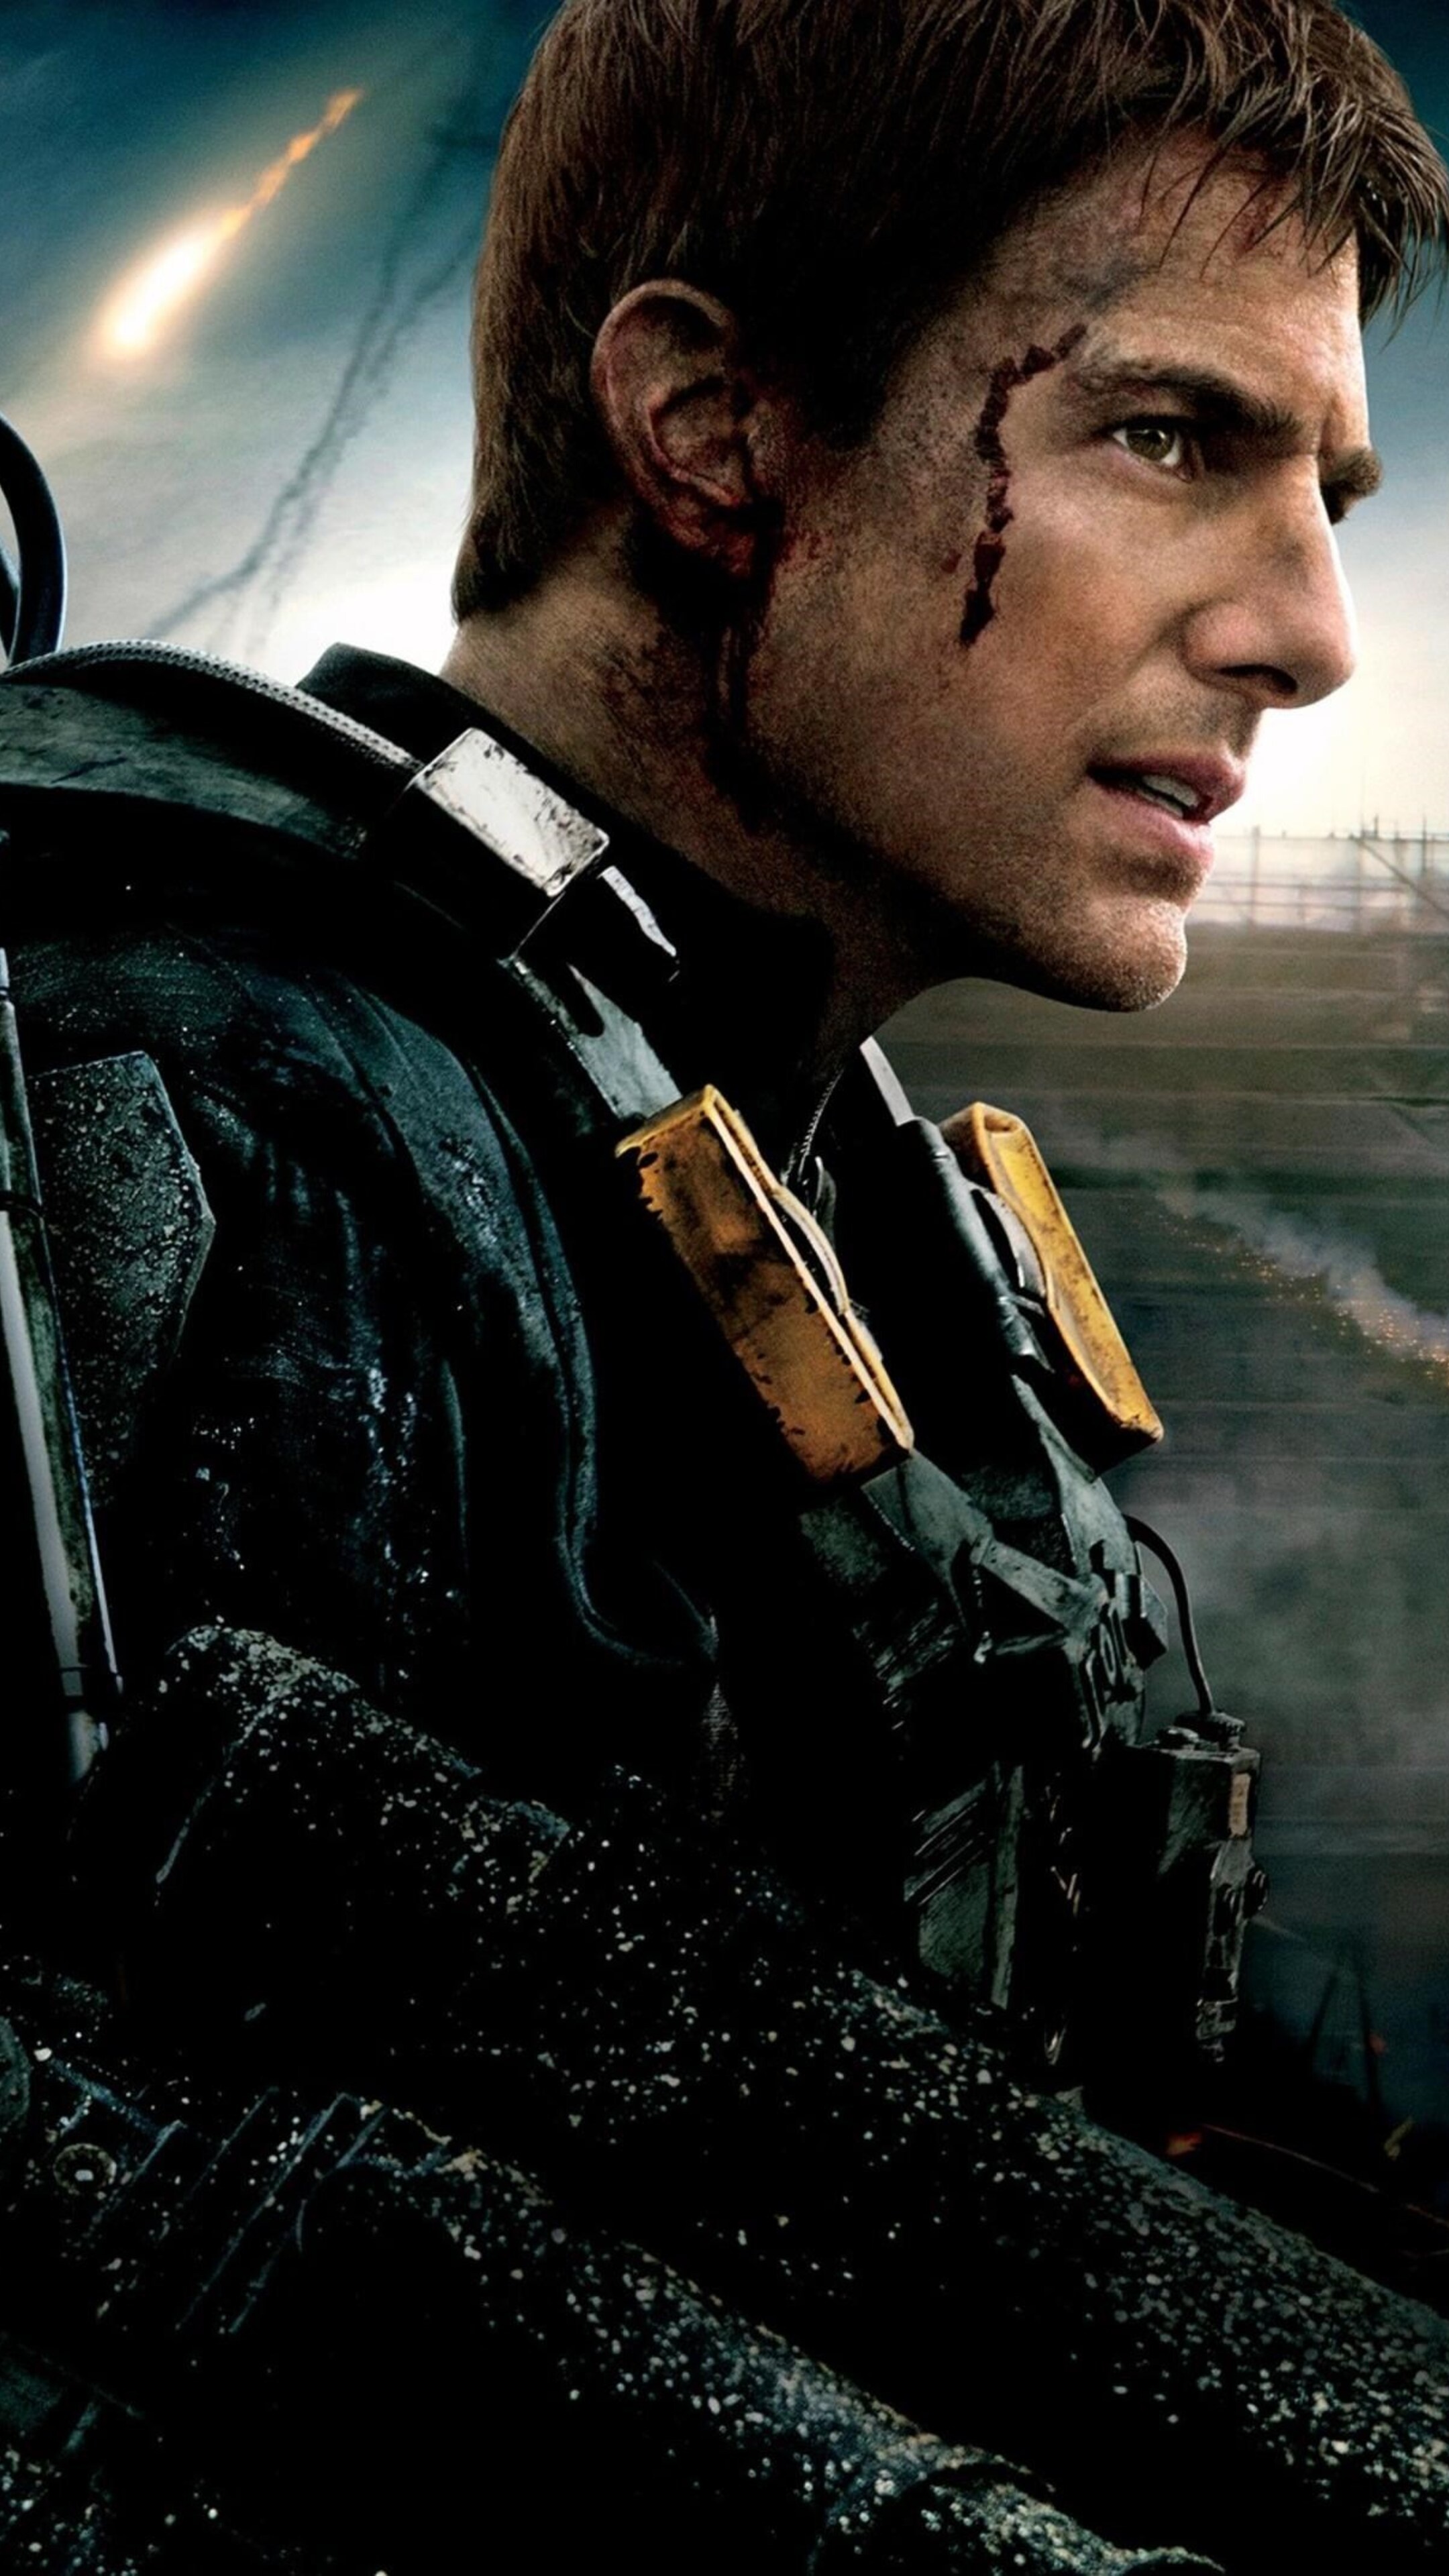 Edge of Tomorrow: Tom Cruise, One of the world's highest-paid actors. 2160x3840 4K Wallpaper.